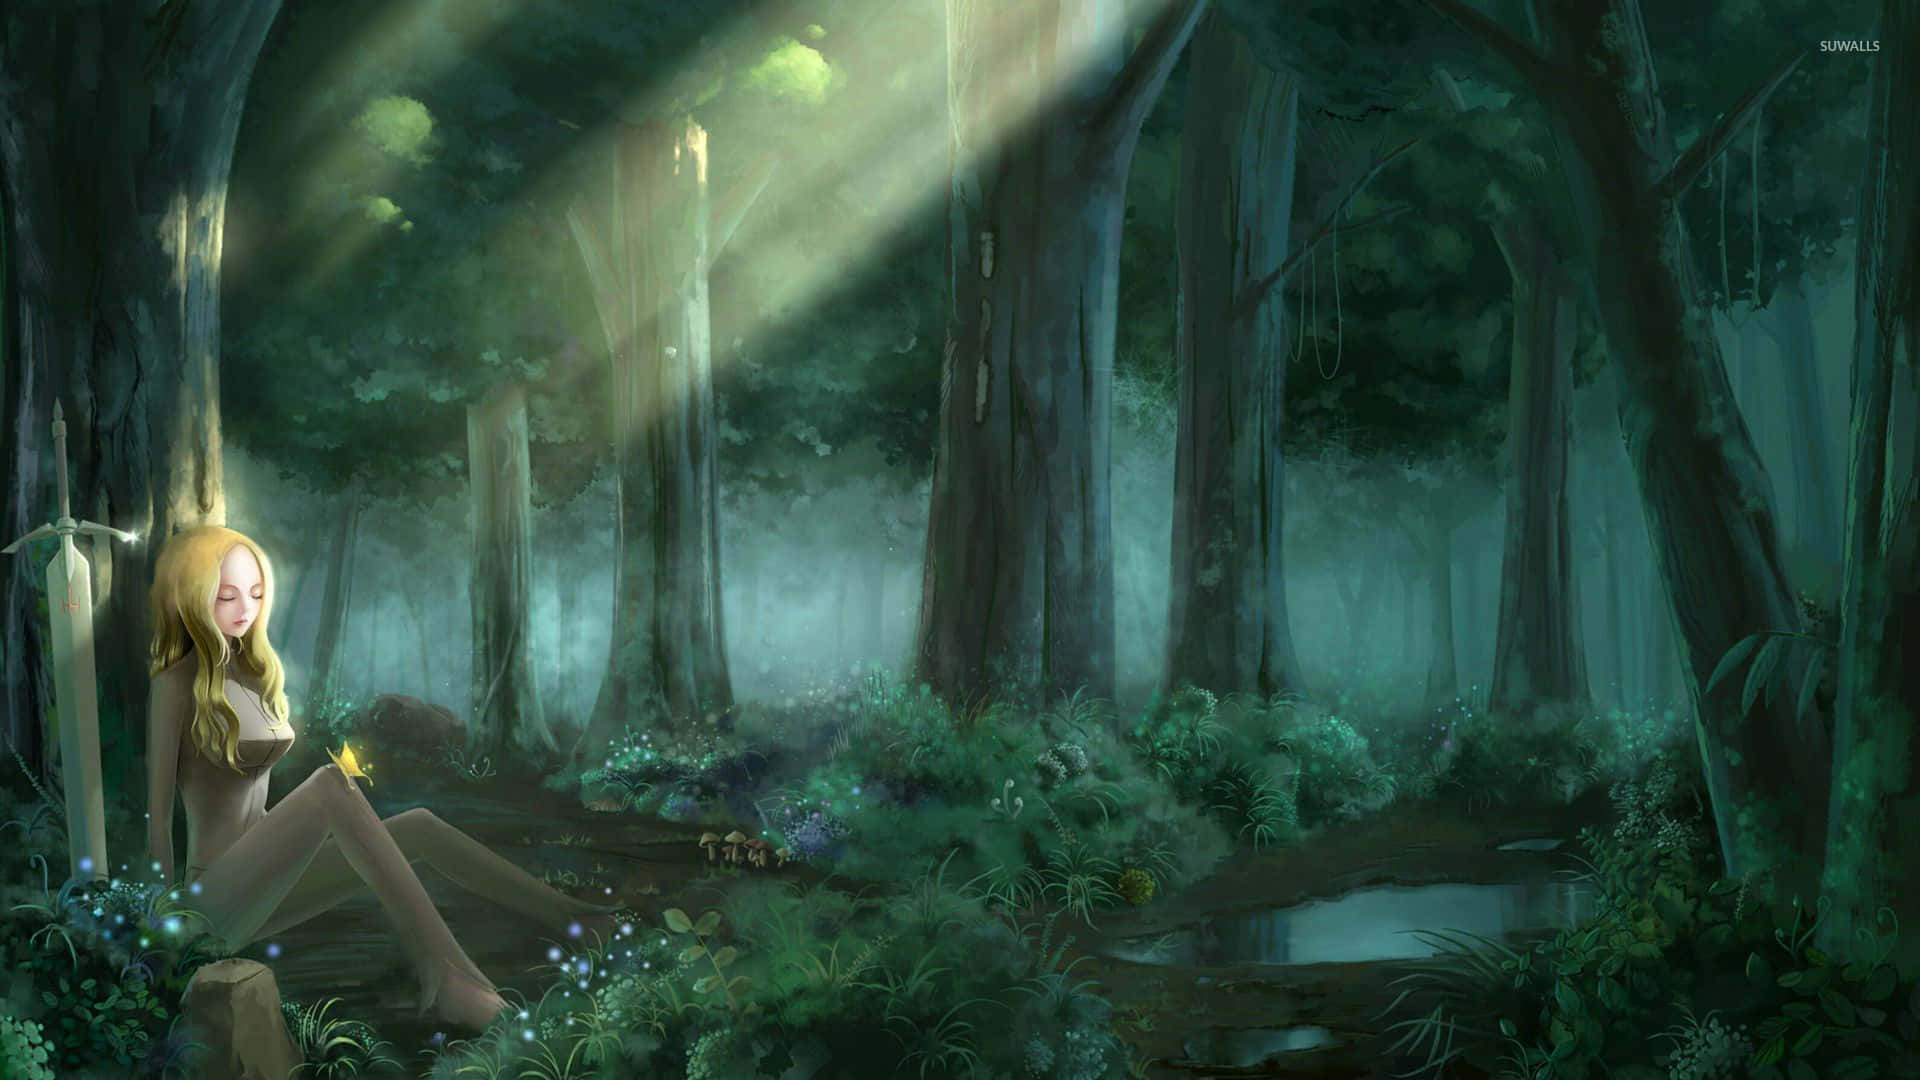 Enjoy the Magical atmosphere of Nature in this Anime Forest. Wallpaper